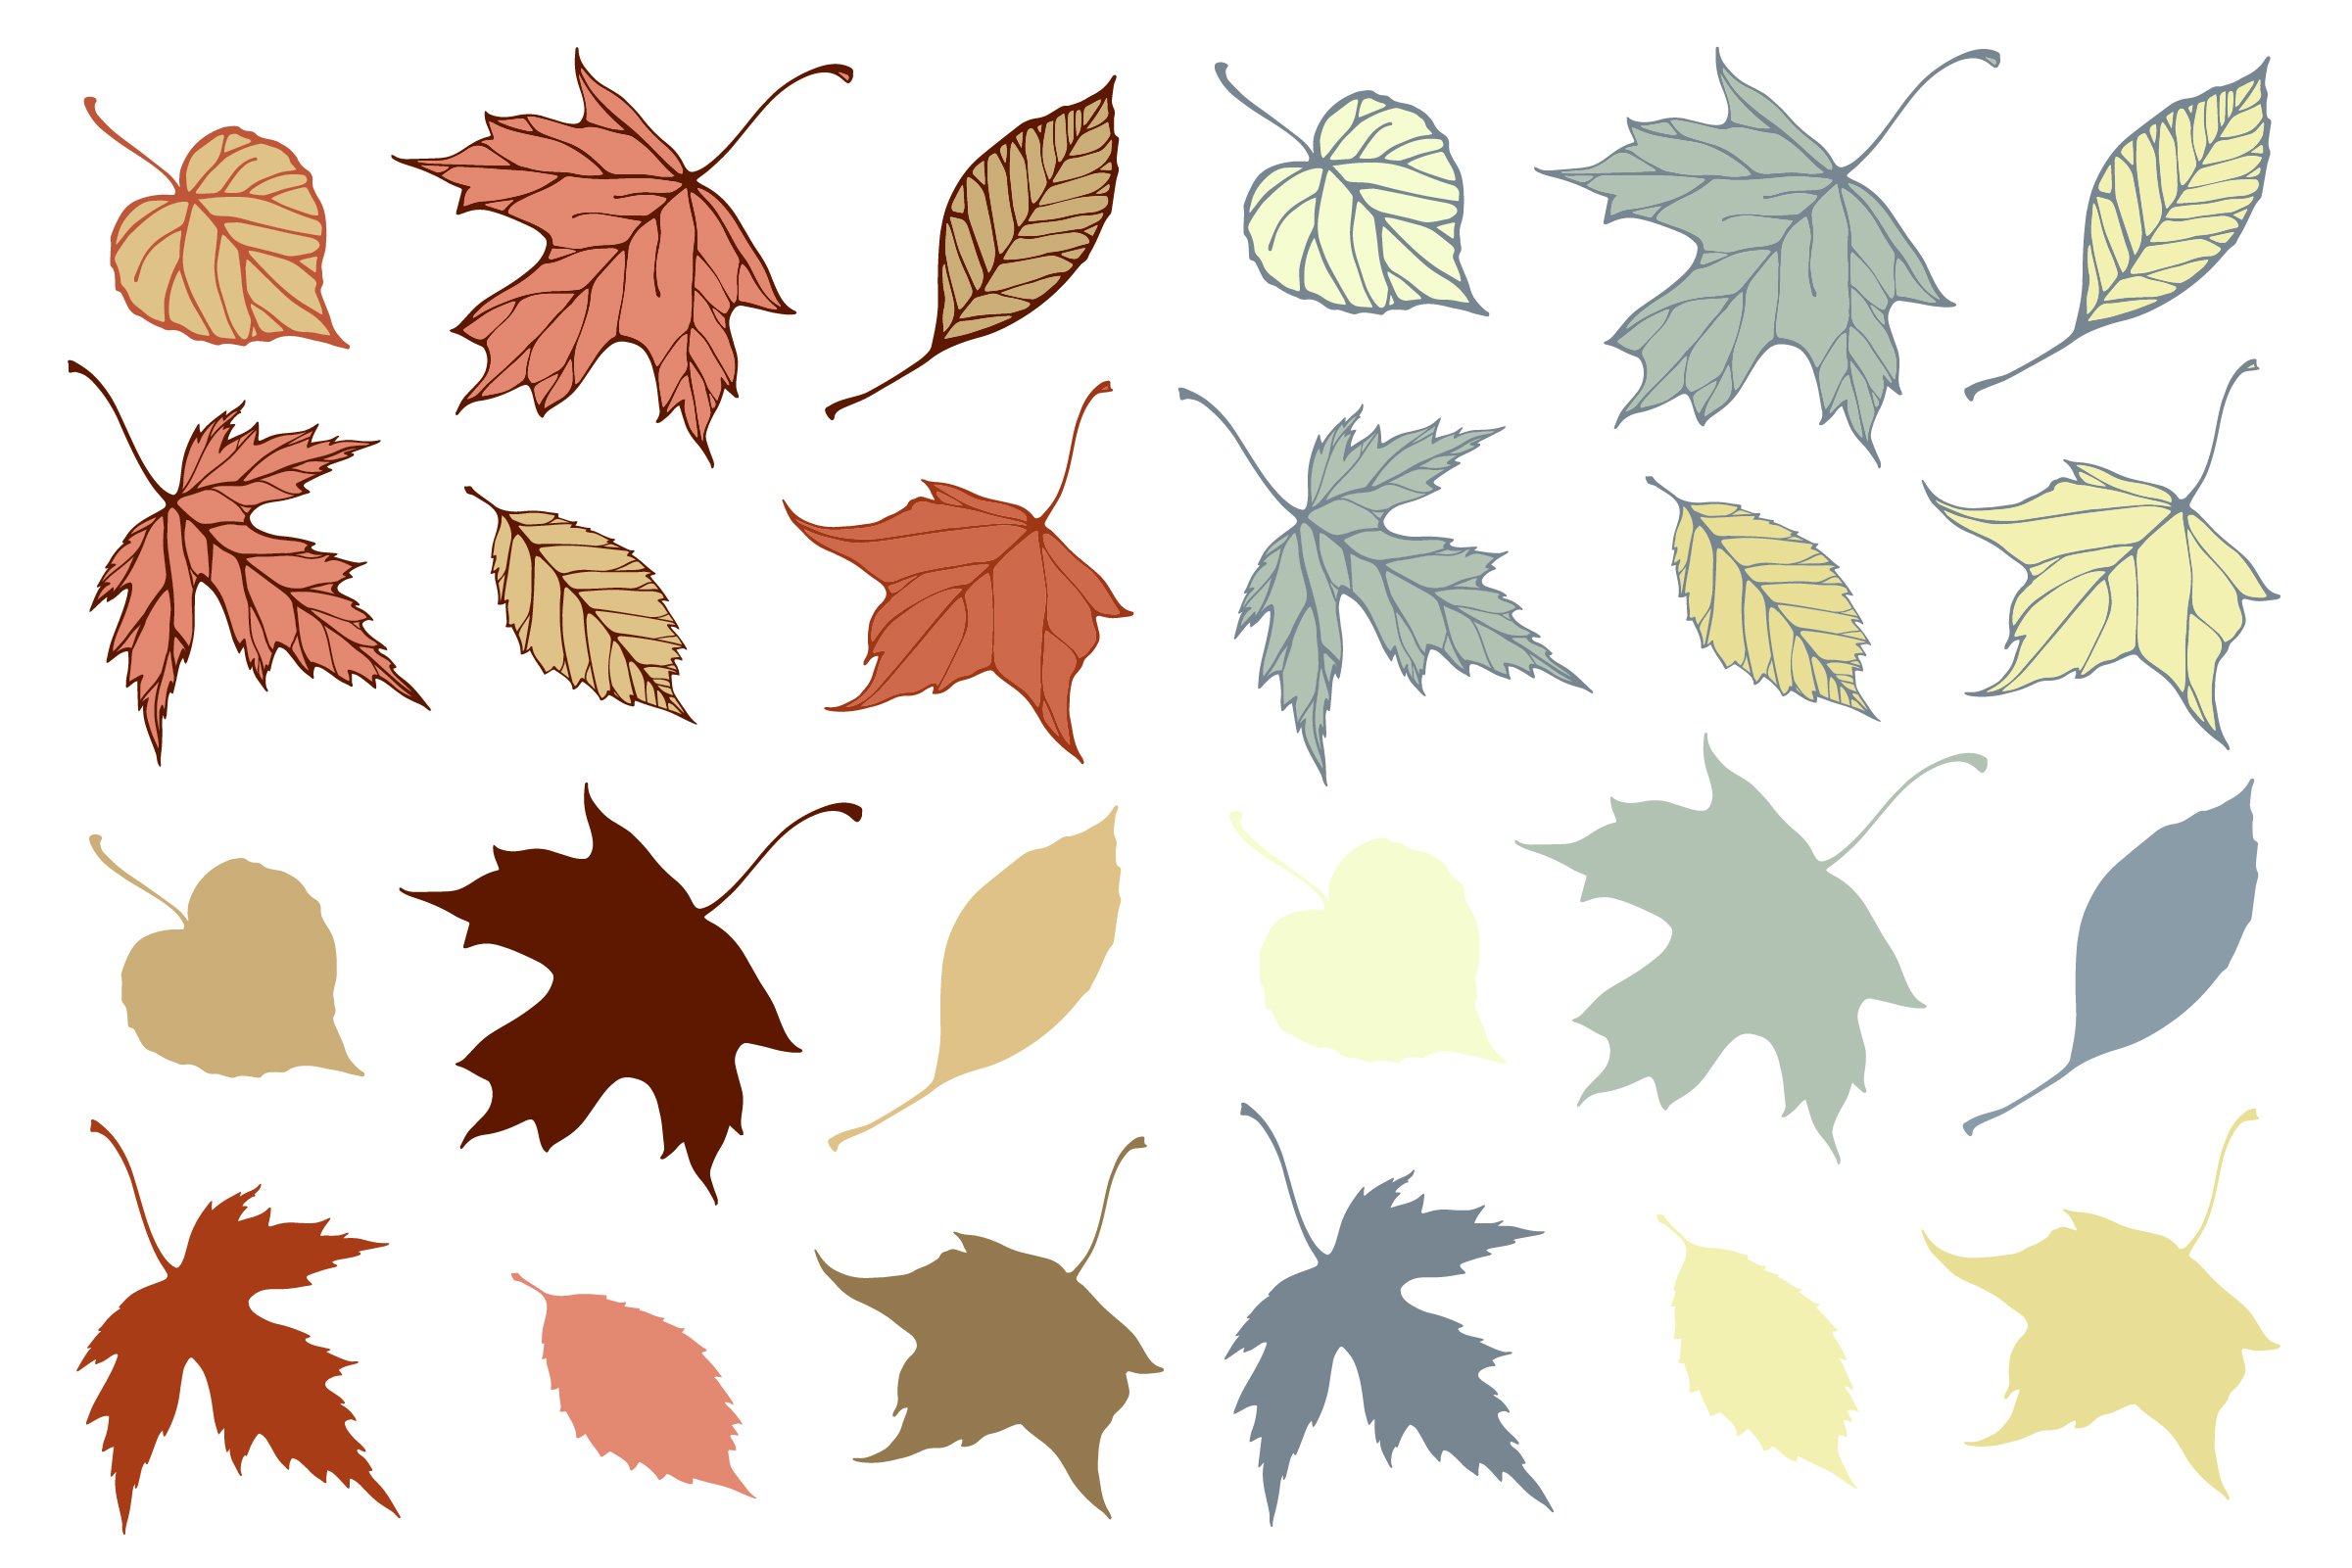 Bunch of different colored leaves on a white background.